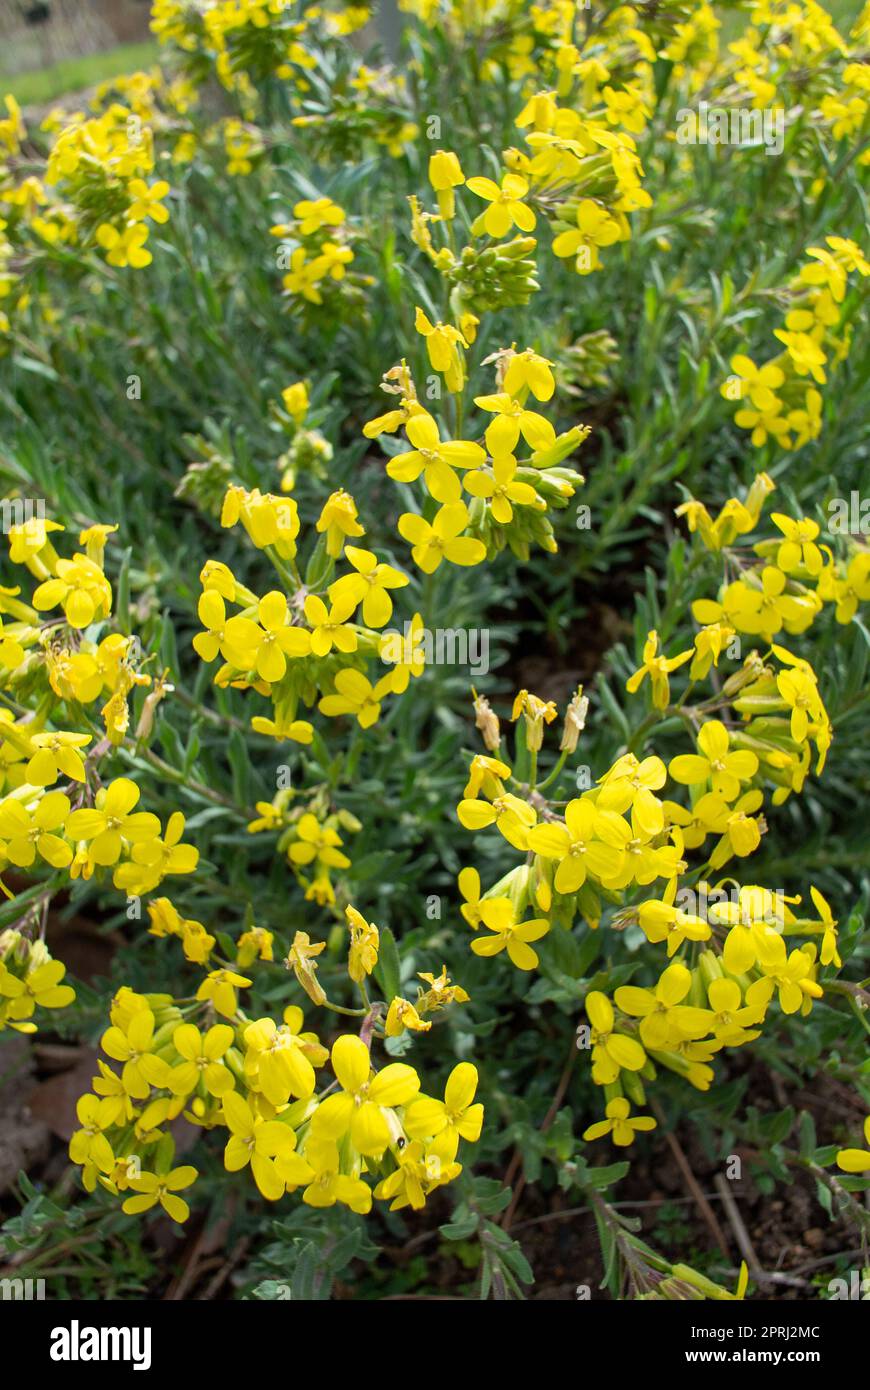 The yellow flowers of Alyssoides Stock Photo